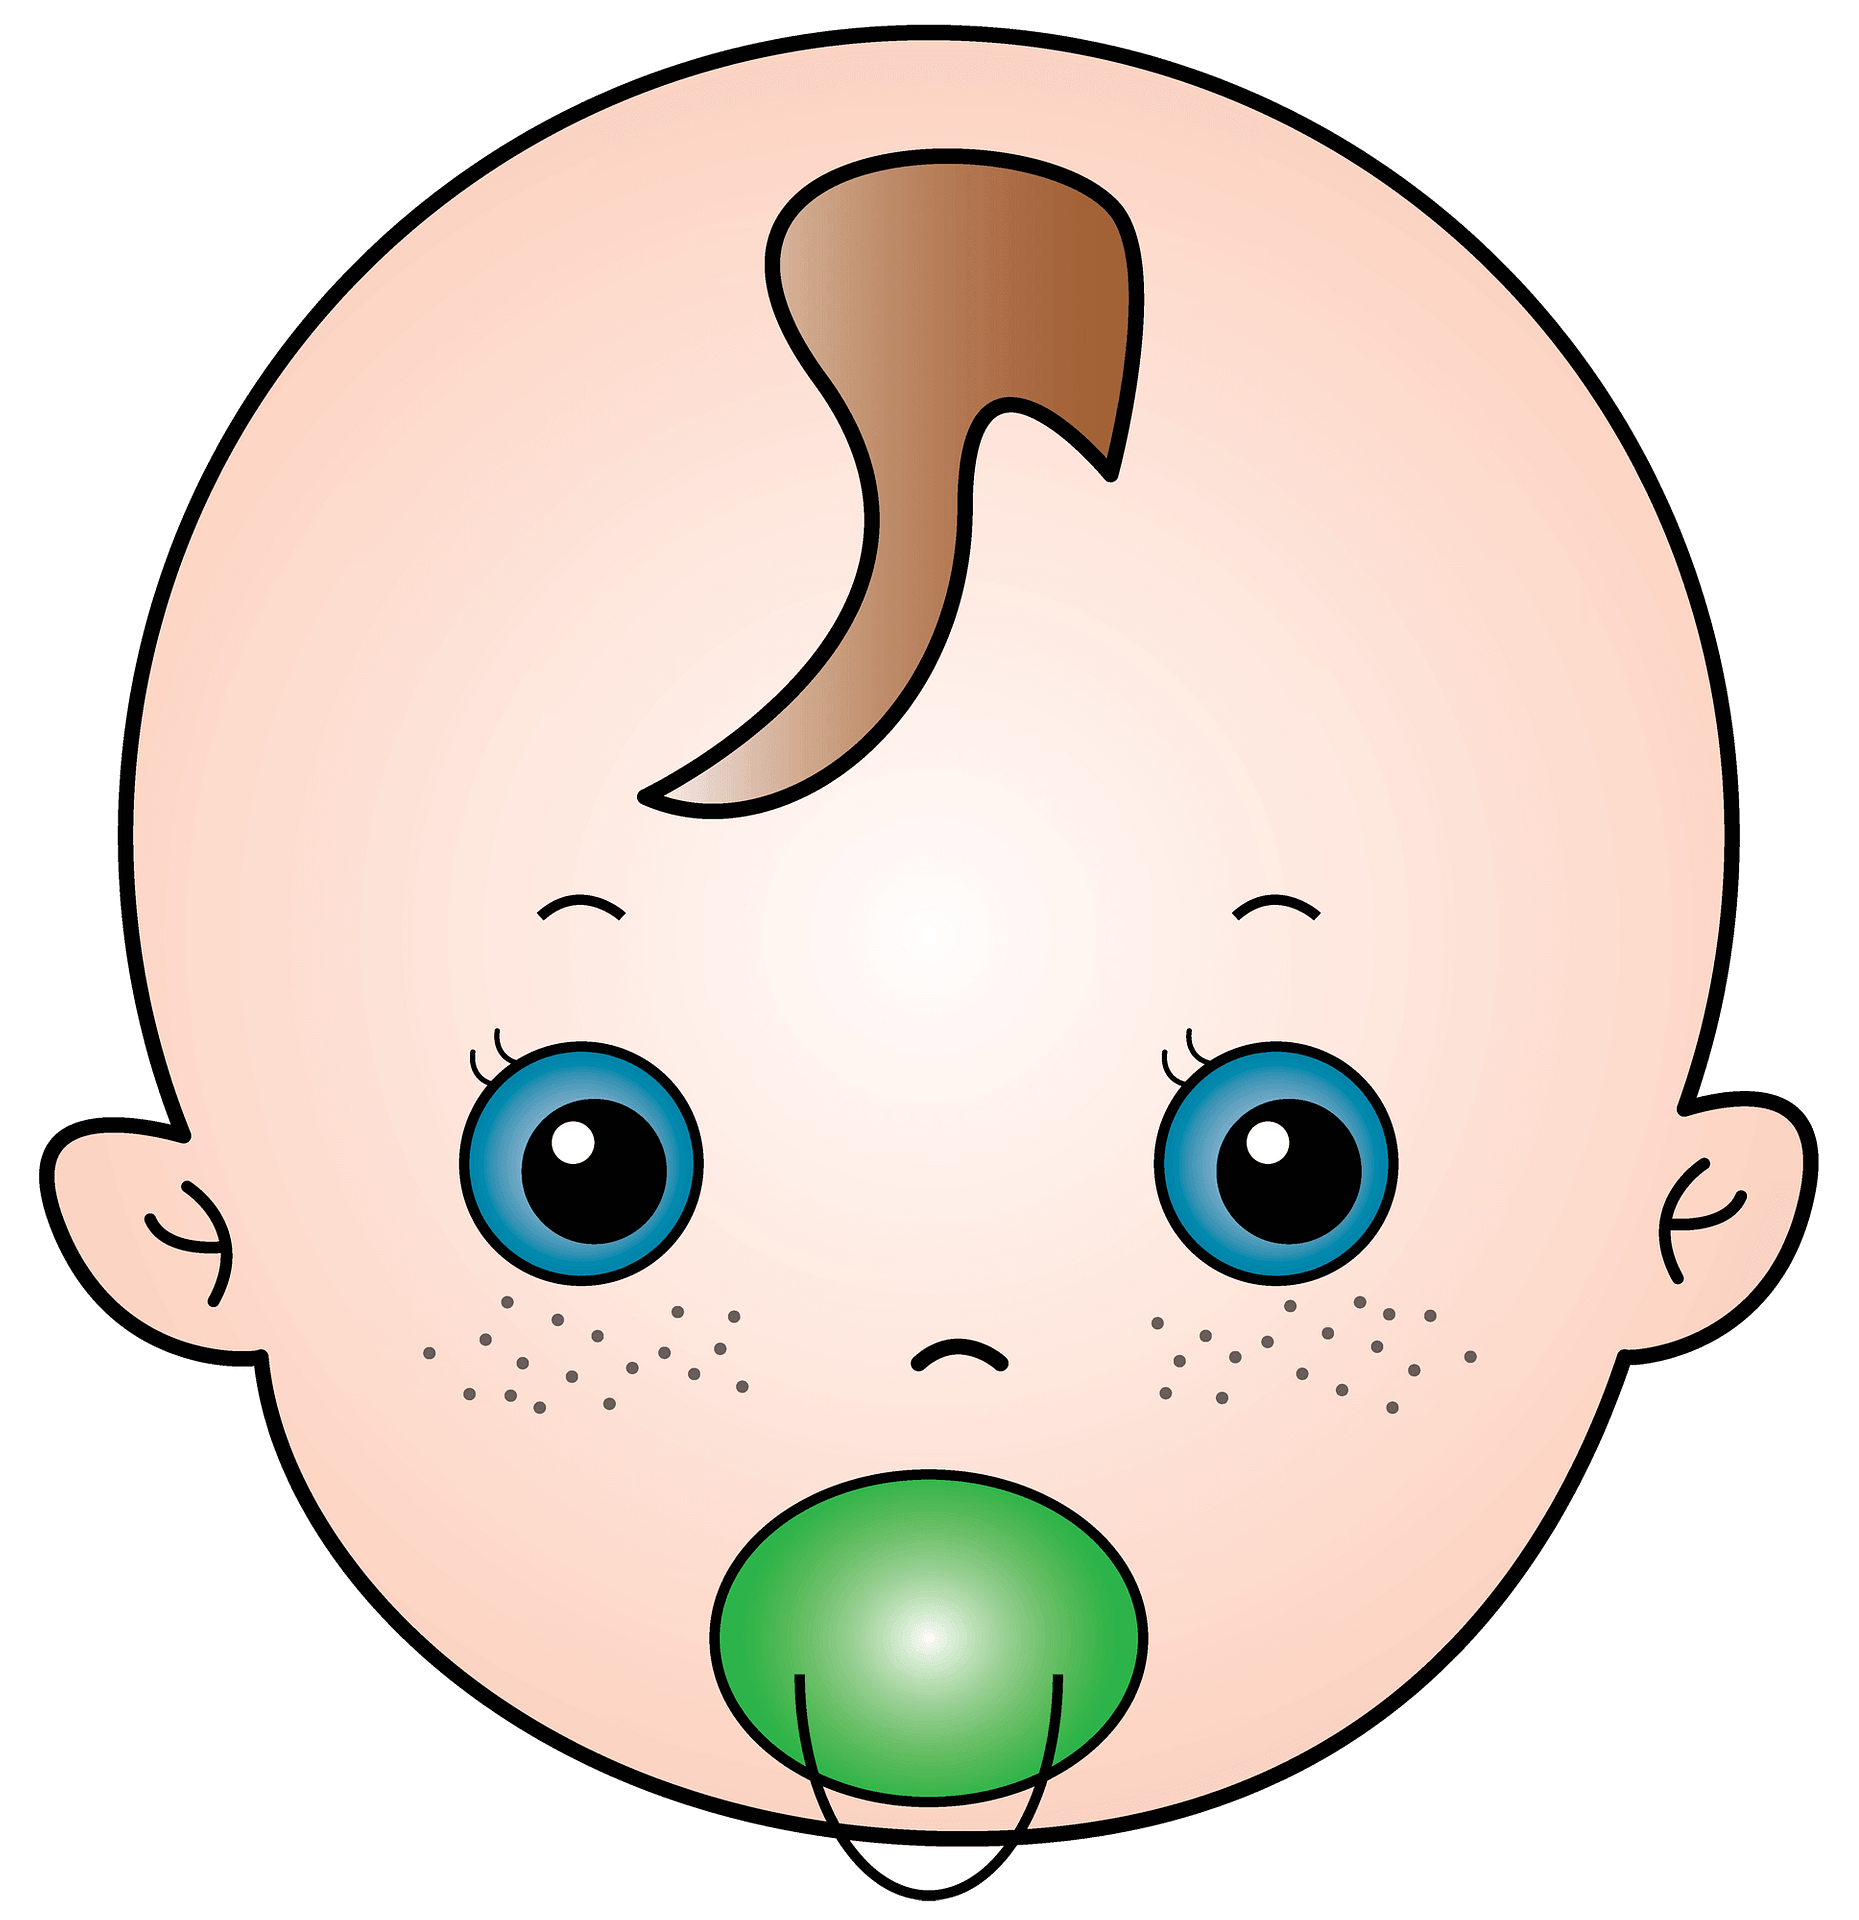 Drawing Infant PNG, Clipart, Area, Art, Baby, Baby Face, Cartoon - Clip ...